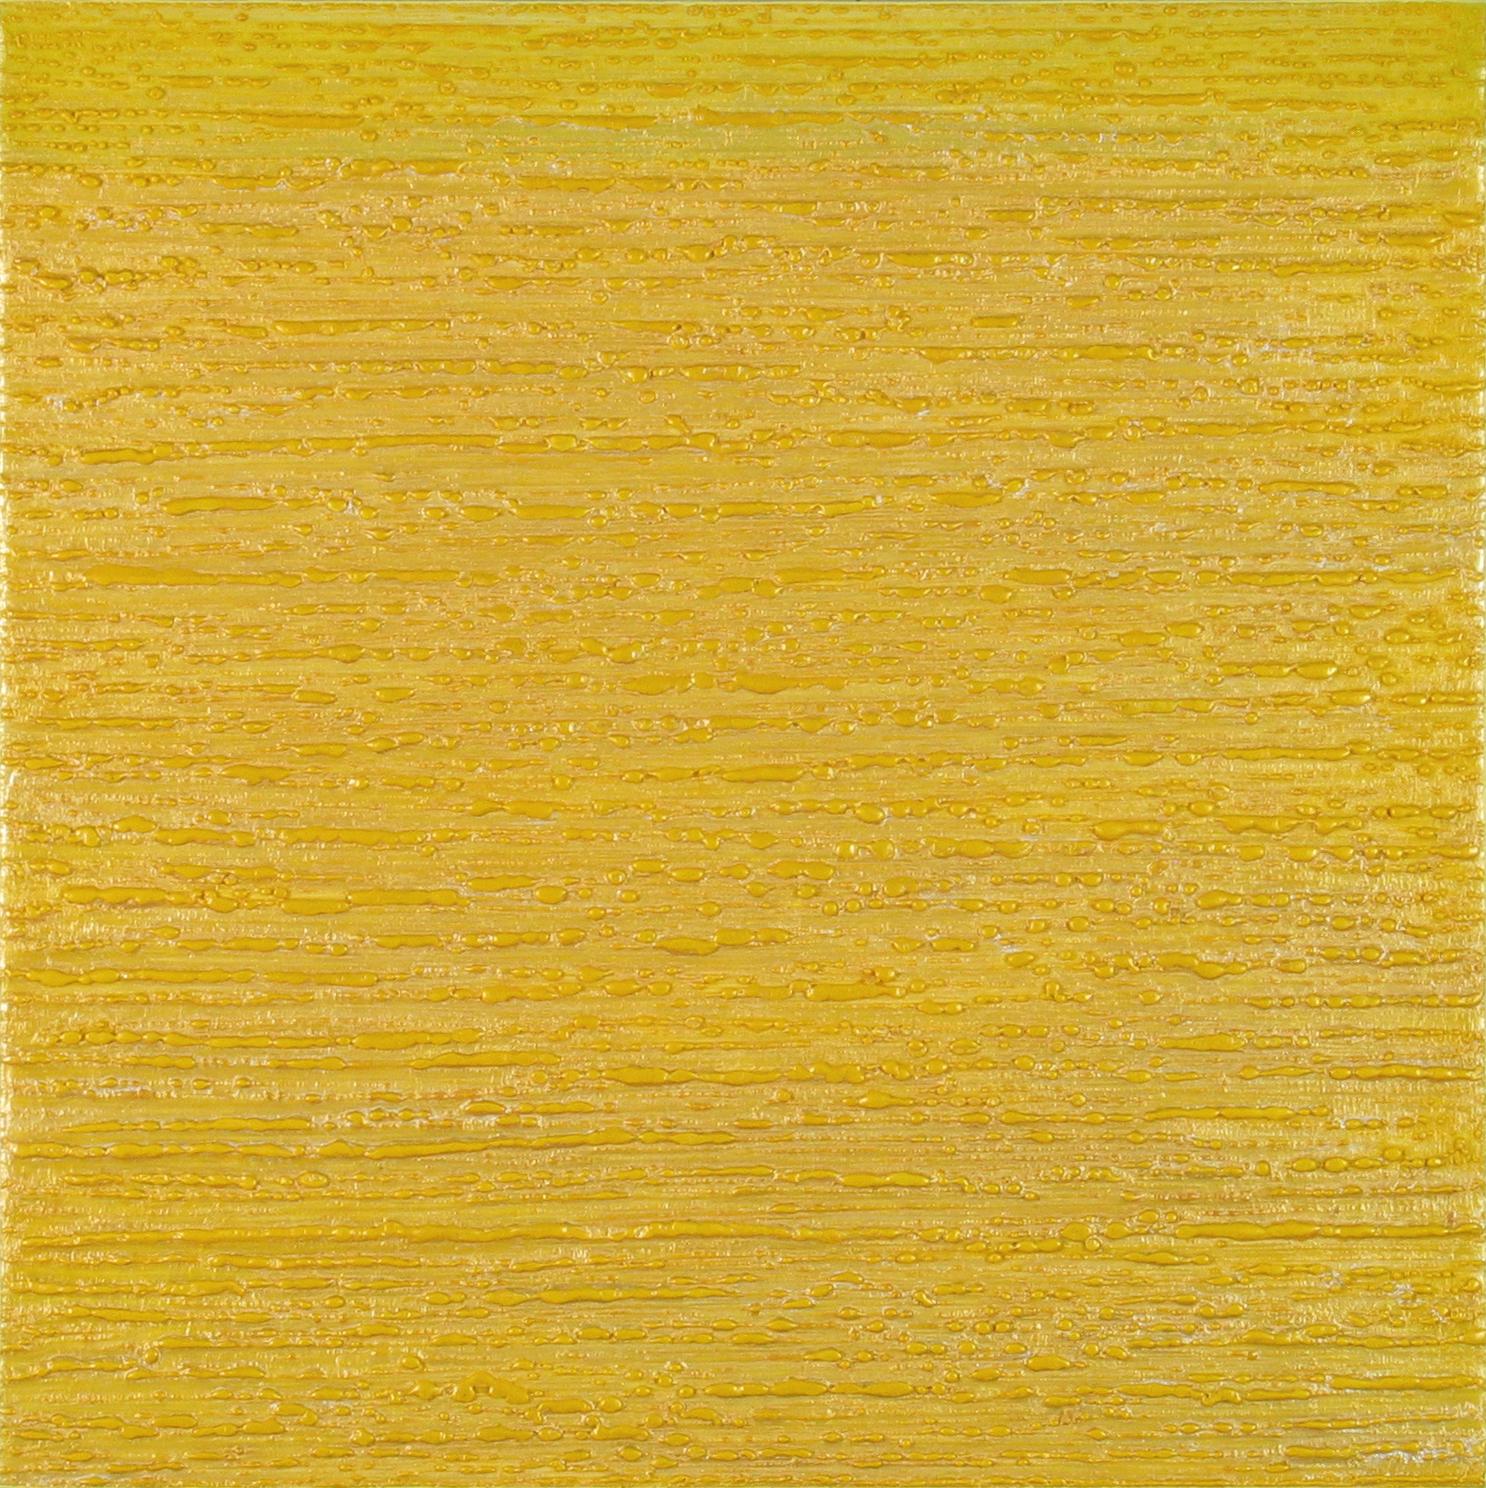 Silk Road 413, Square Color Field Painting, Bright Yellow Golden Lemon